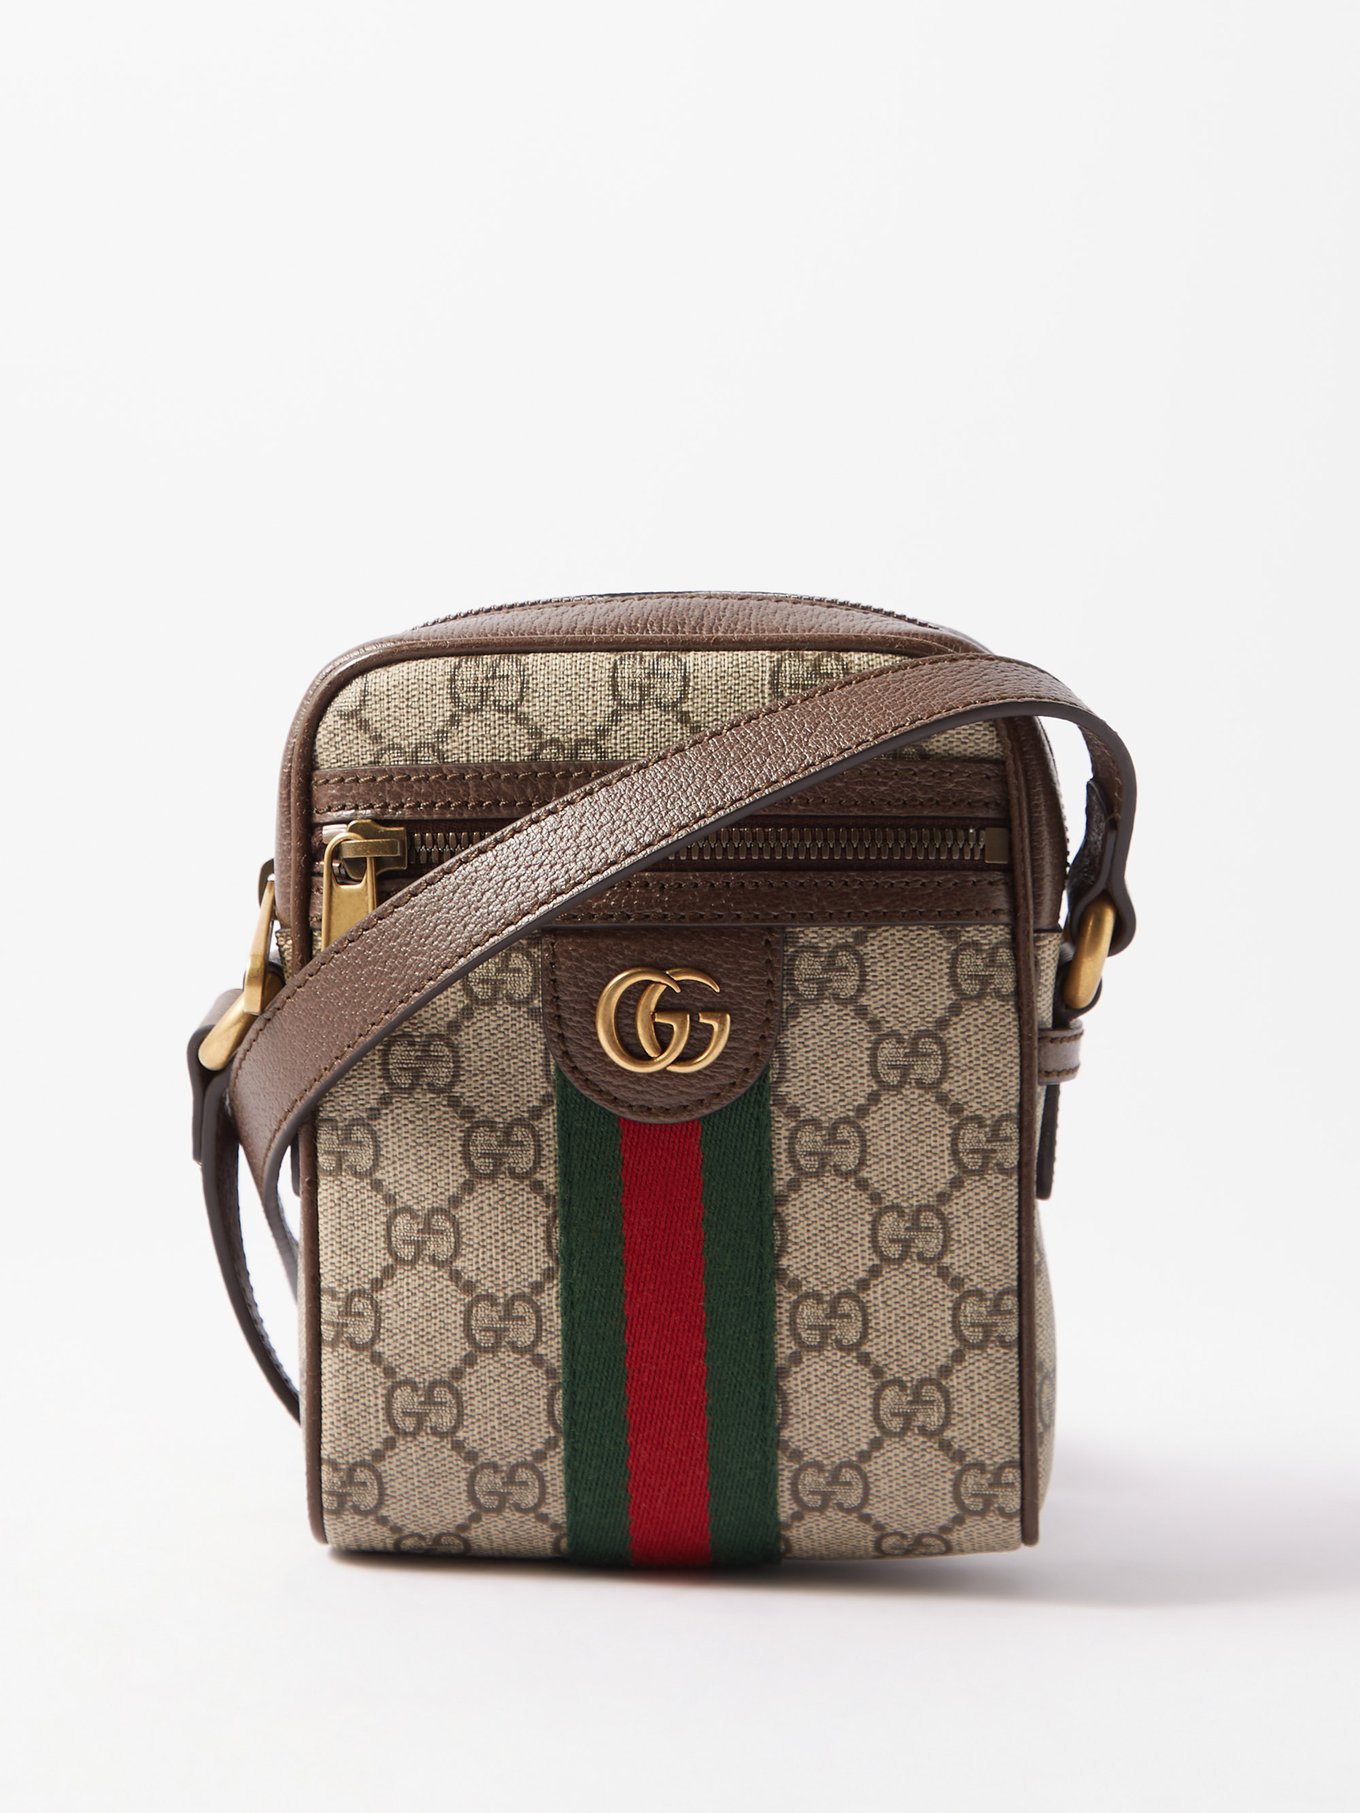 Gg supreme coated canvas carry-on bag - Gucci - Men